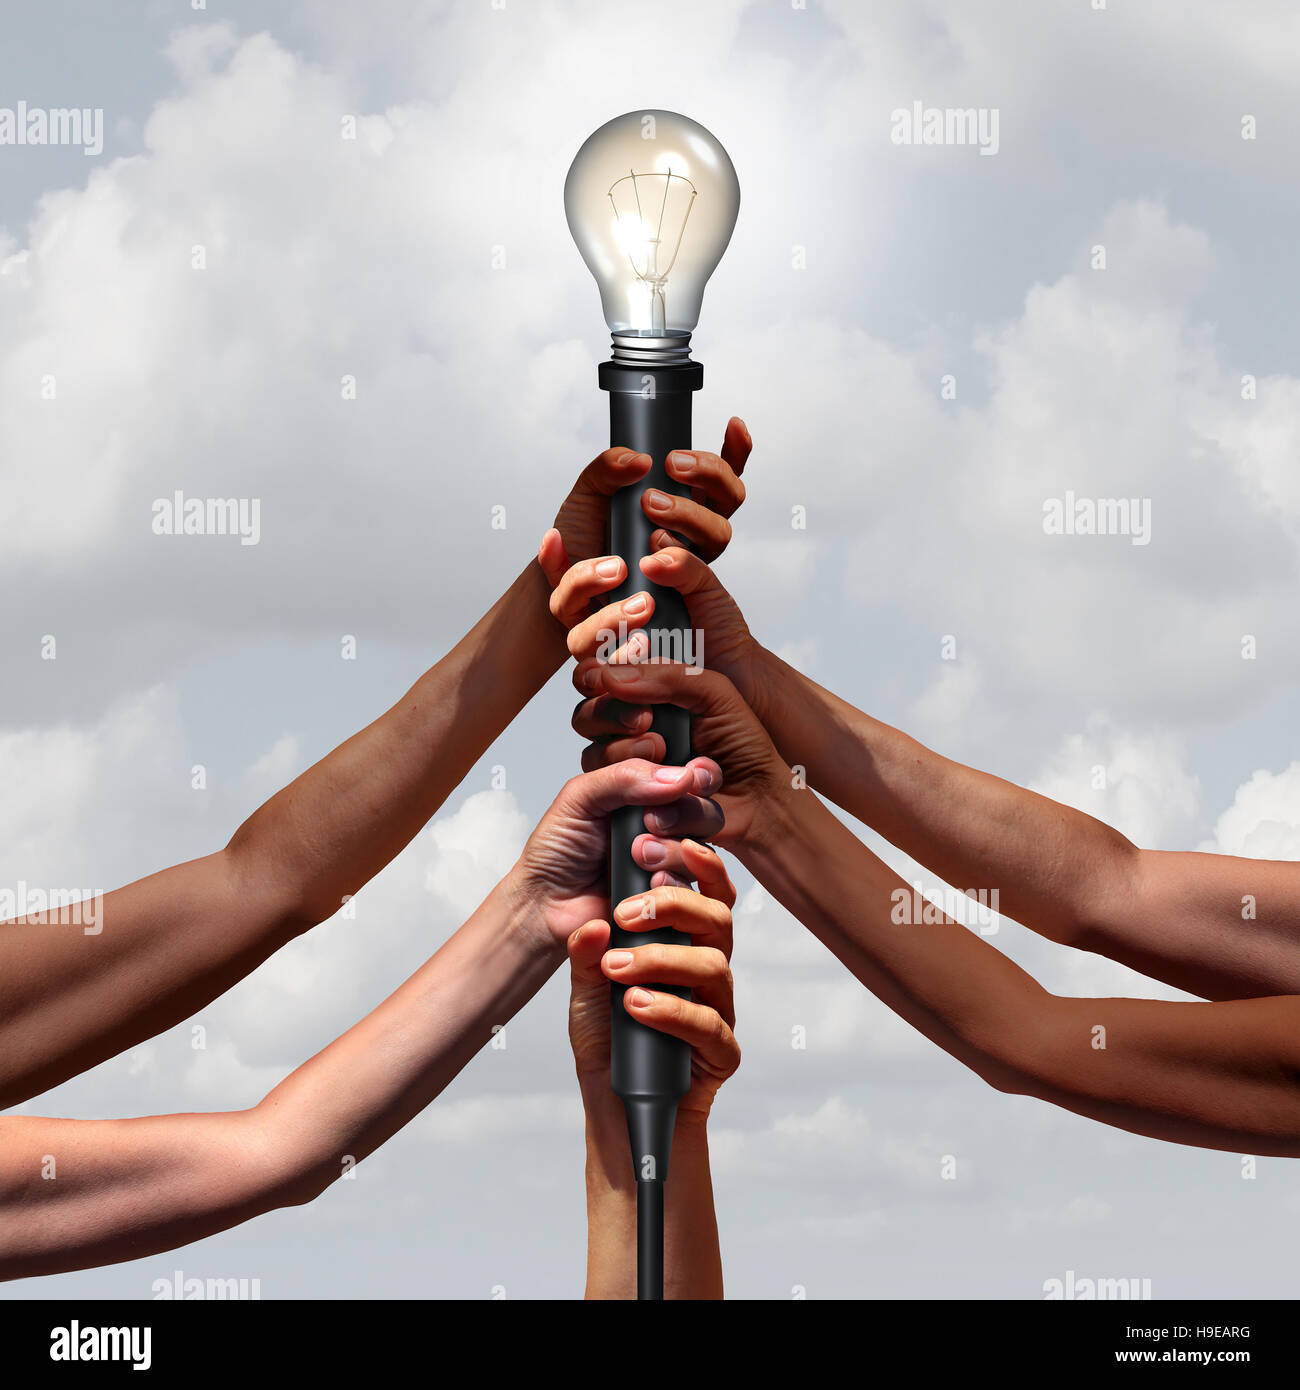 Idea team group as diverse people holding an electric light socket with an illuminated lightbulb as a connected community insight or social thinking c Stock Photo